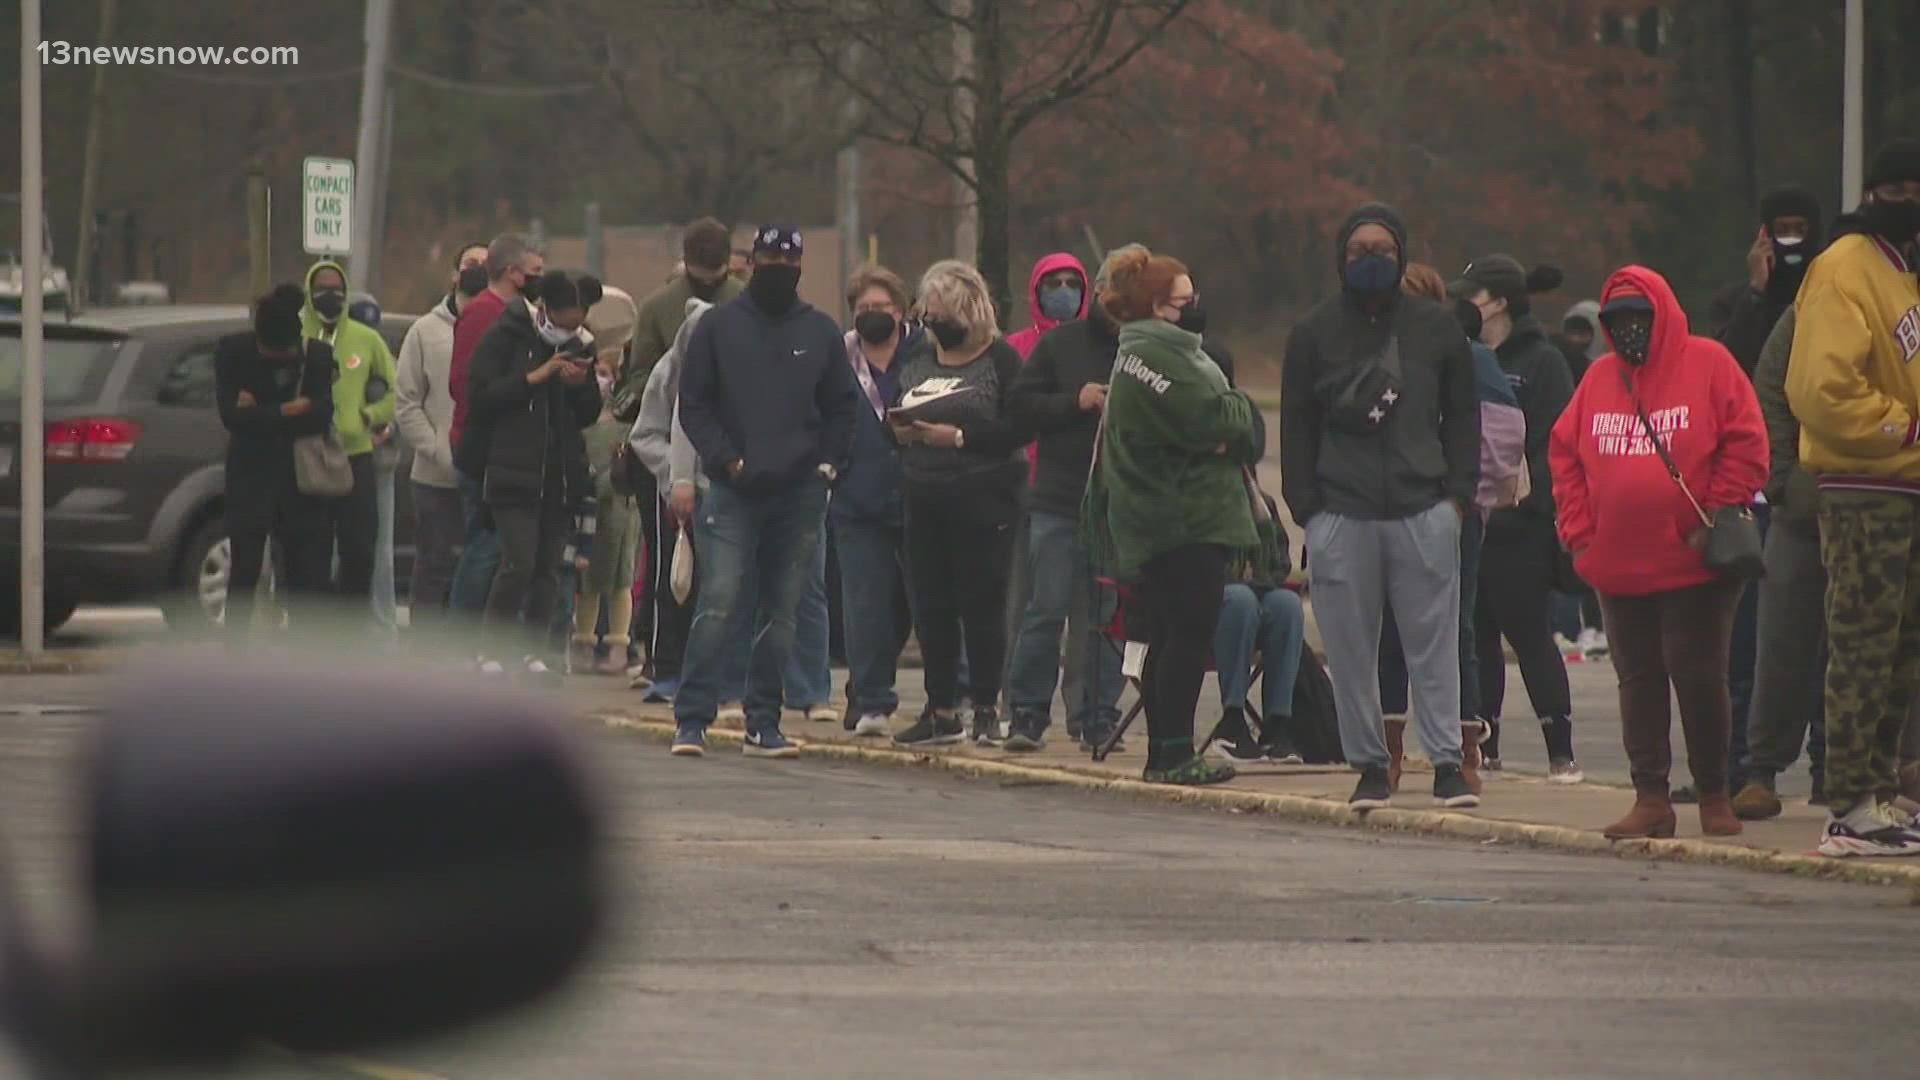 From Norfolk to Hampton, people waited in extremely long lines in the hopes of getting tested. Some people sat in lawn chairs, with blankets and books to read.